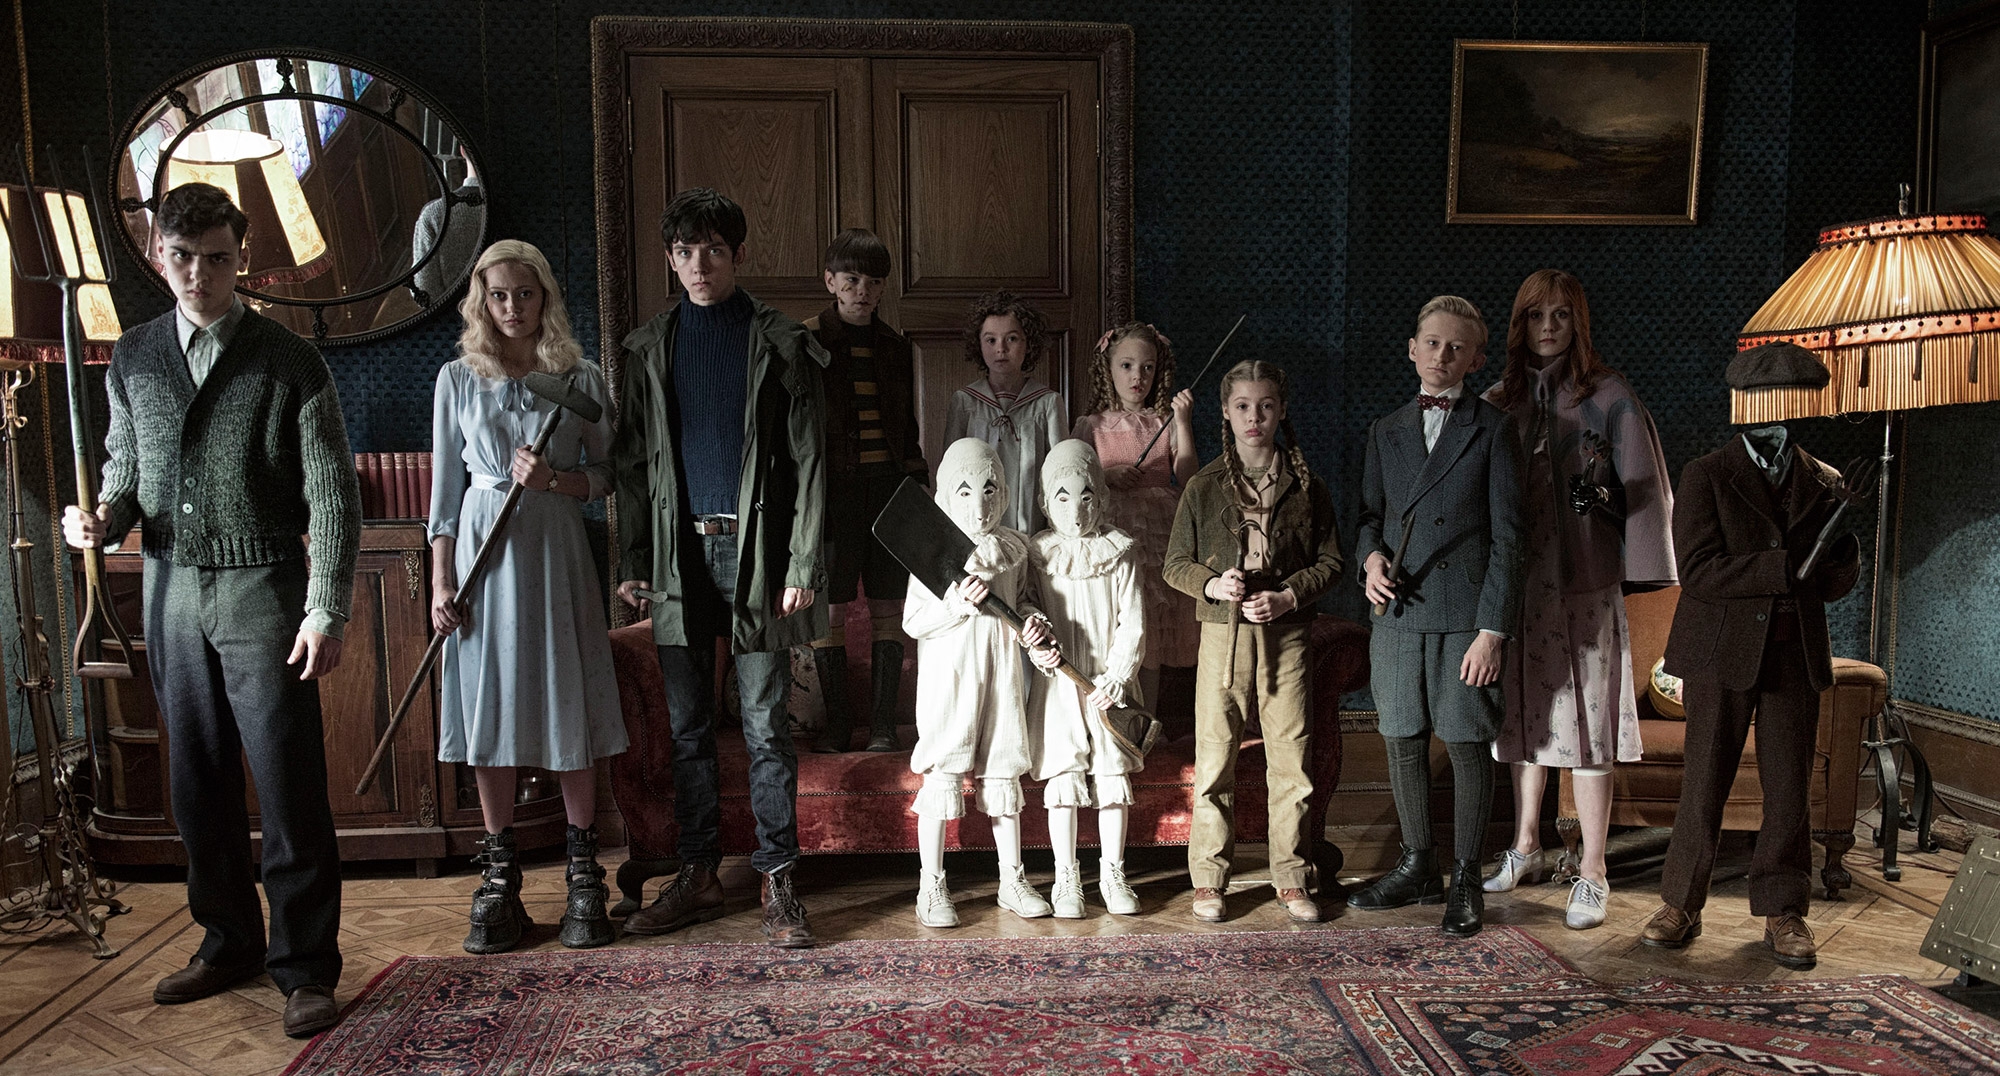 Trailer & Review:  Miss Peregrine's Home for Peculiar Children